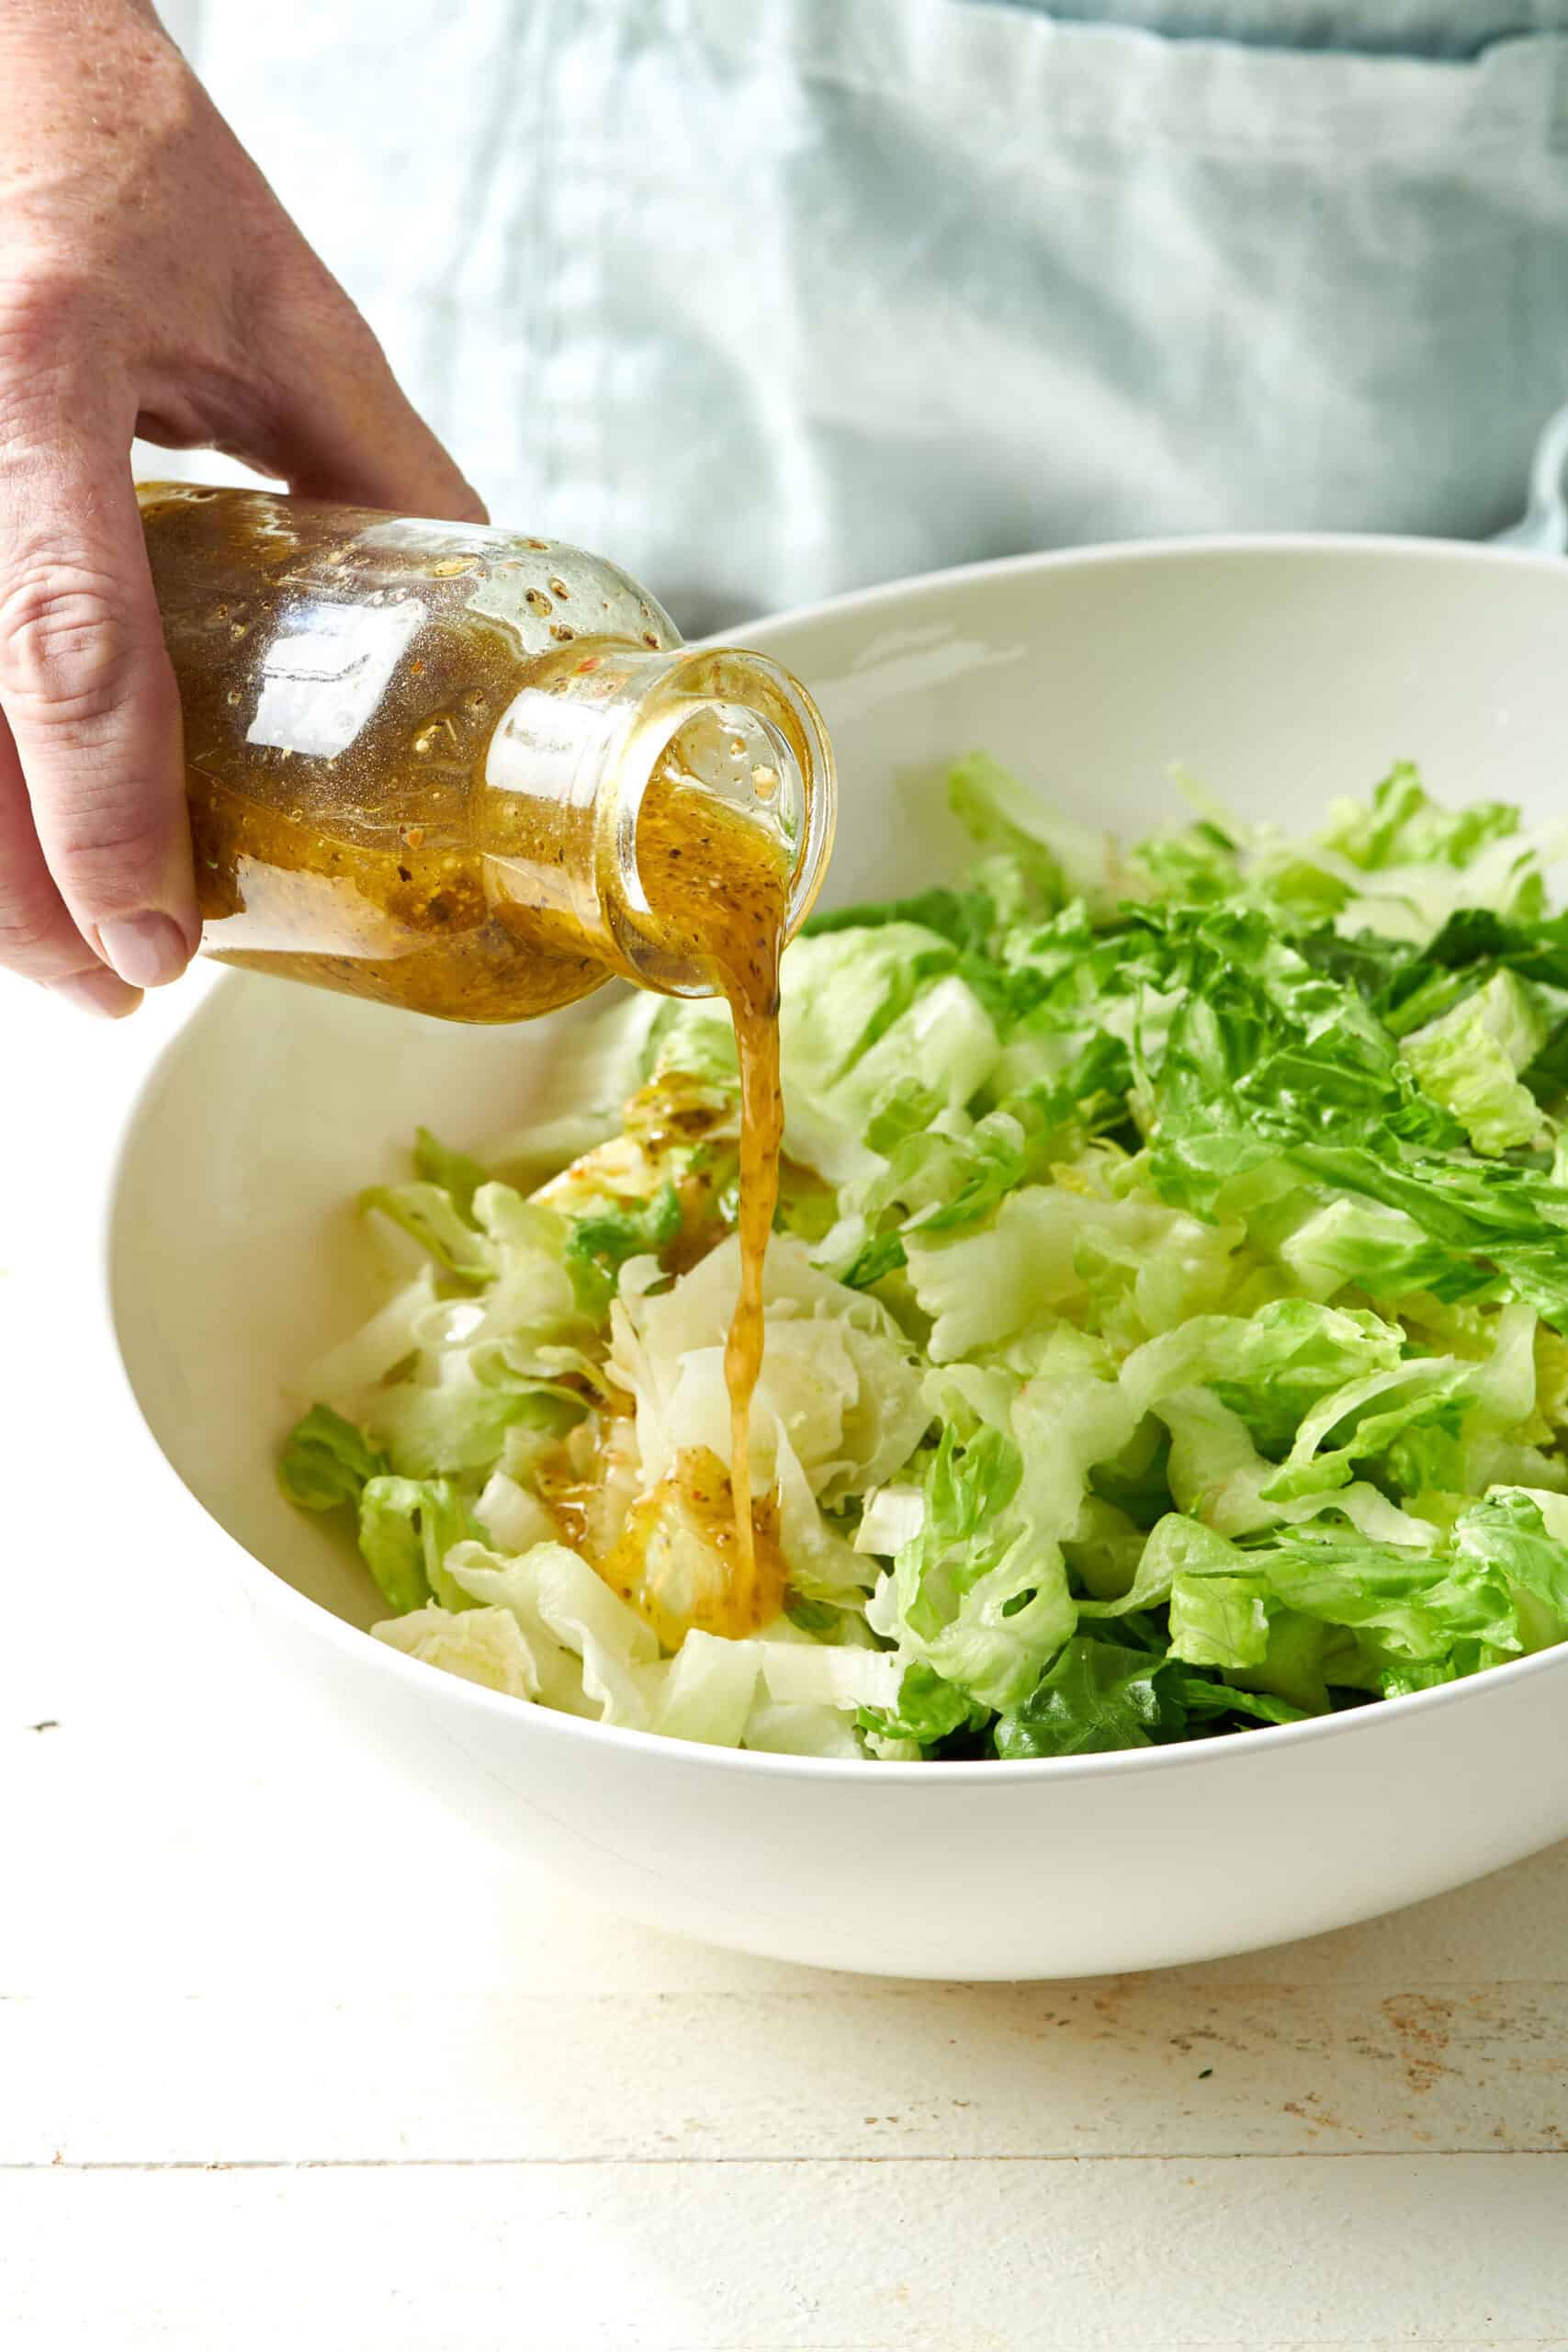 Woman pouring Italian dressing onto a bowl of salad.